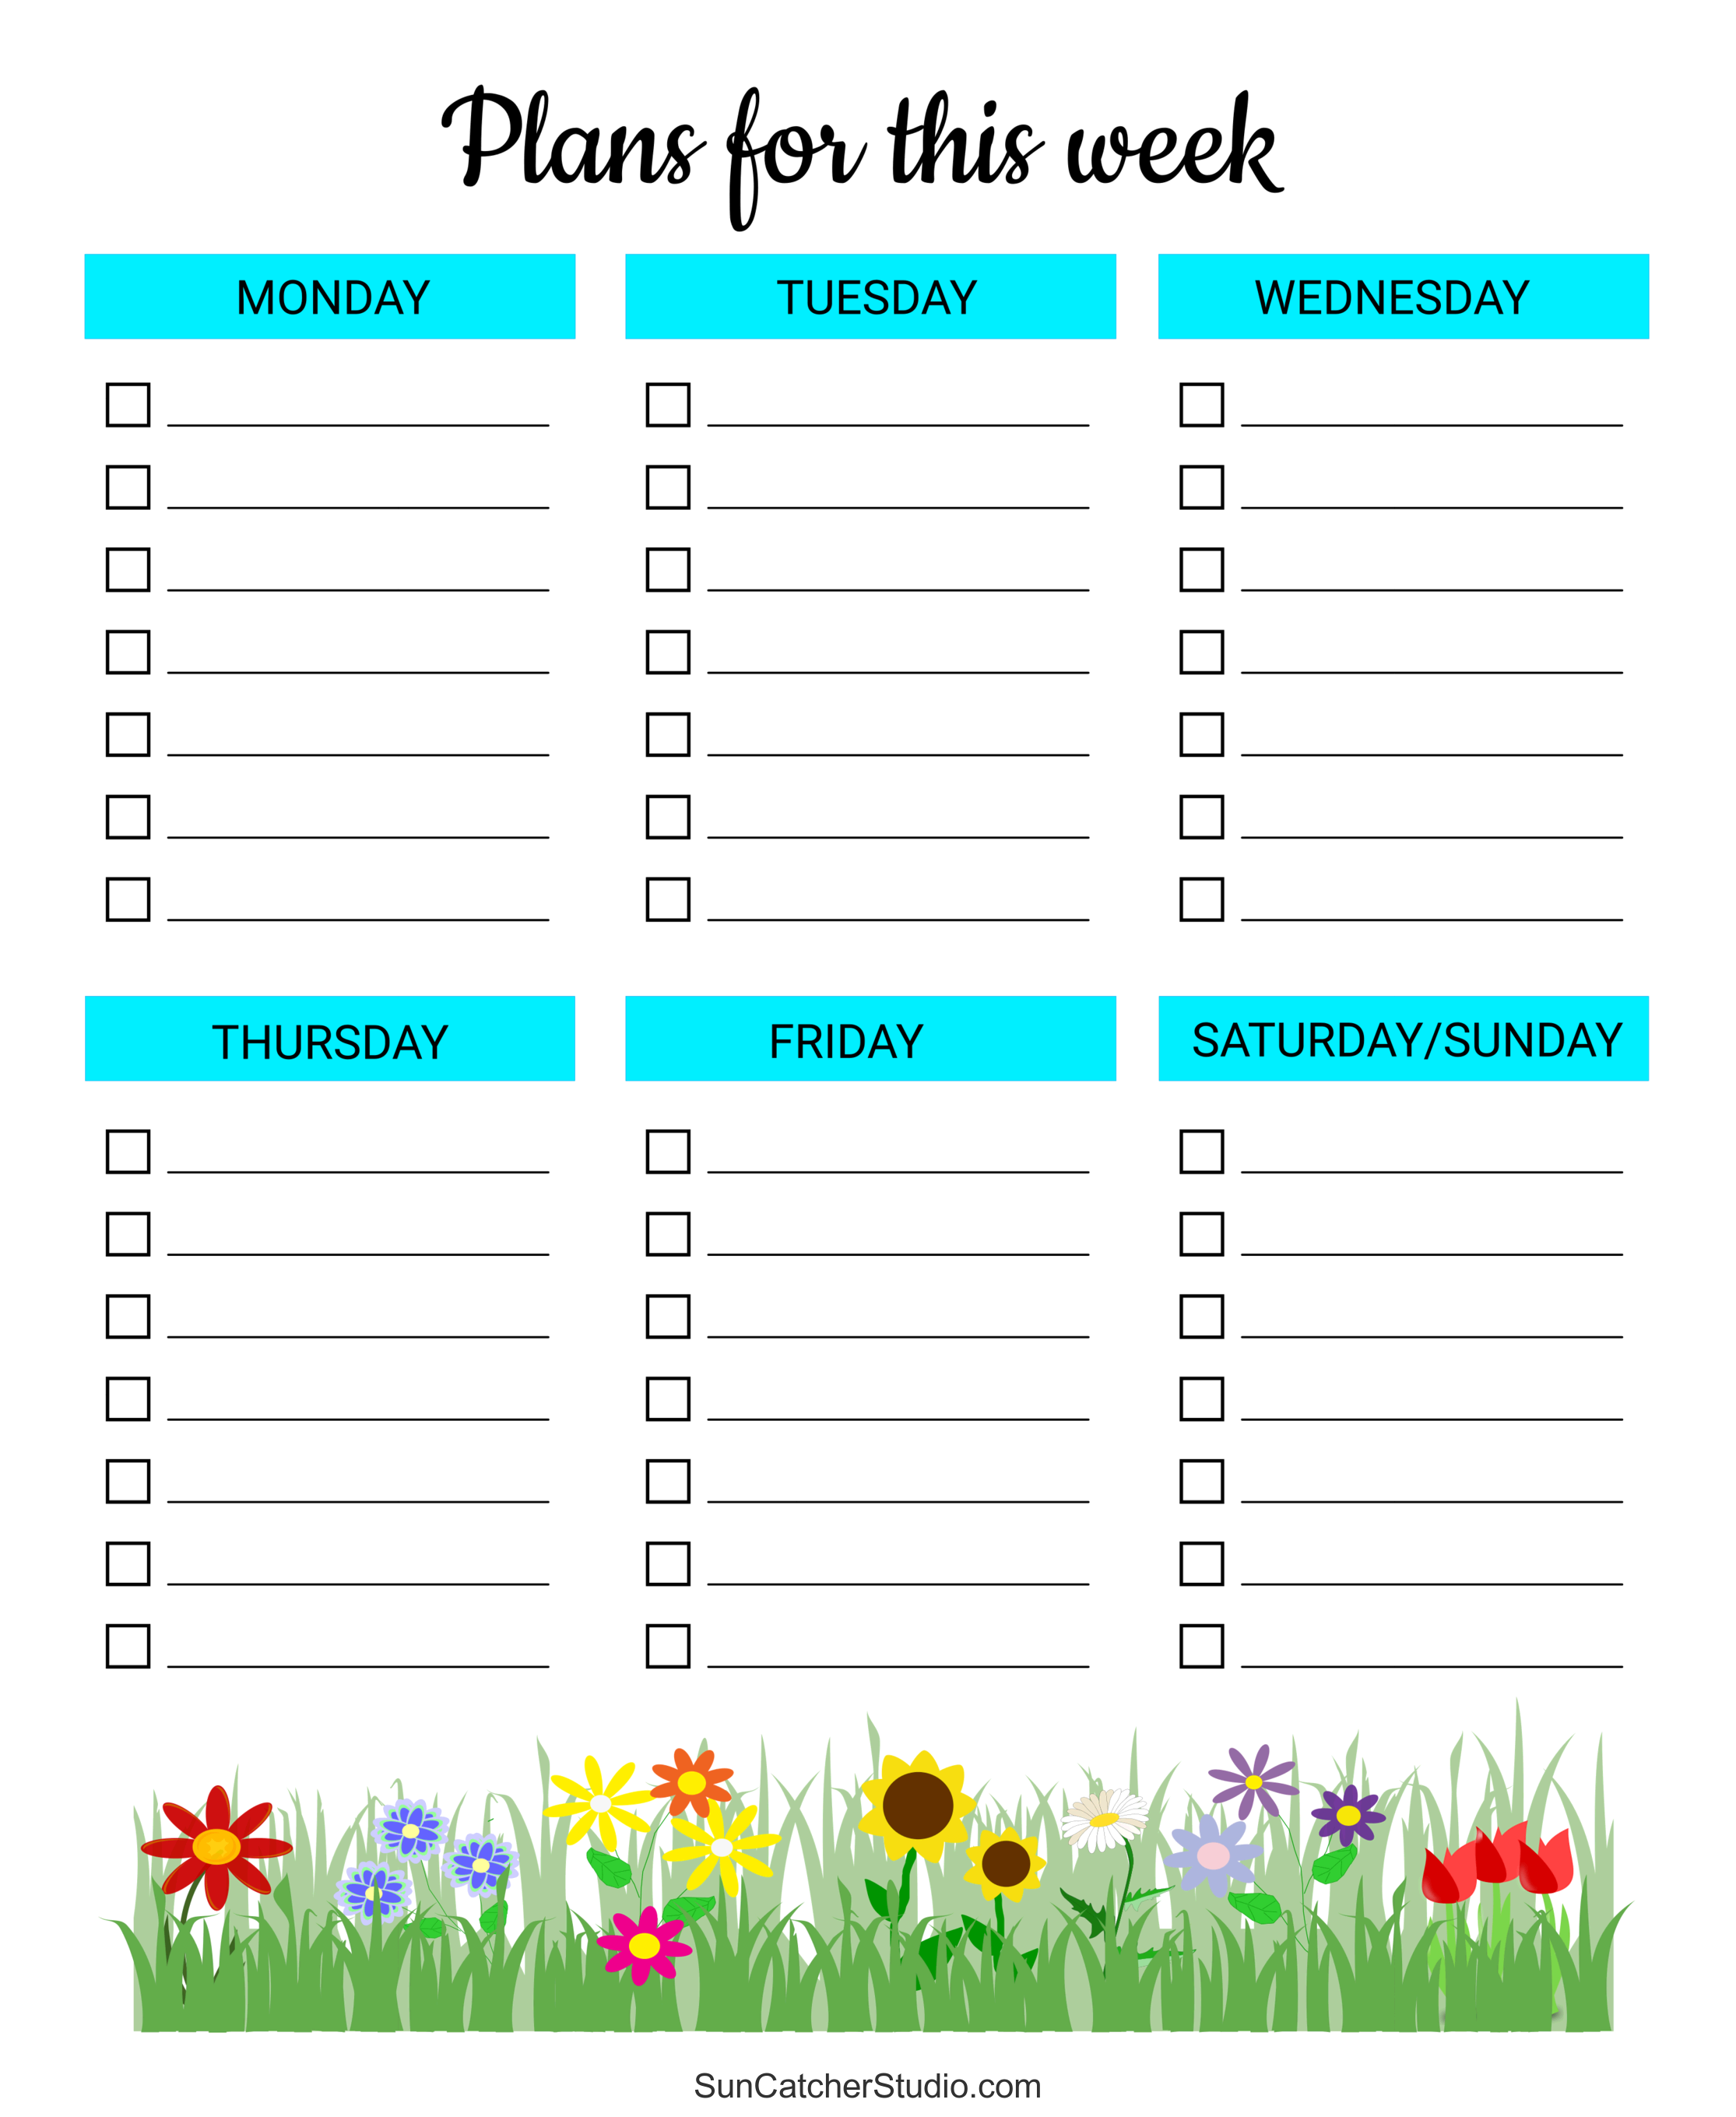 Free Printable Weekly Planner Templates (PDF) – DIY Projects, Patterns,  Monograms, Designs, Templates